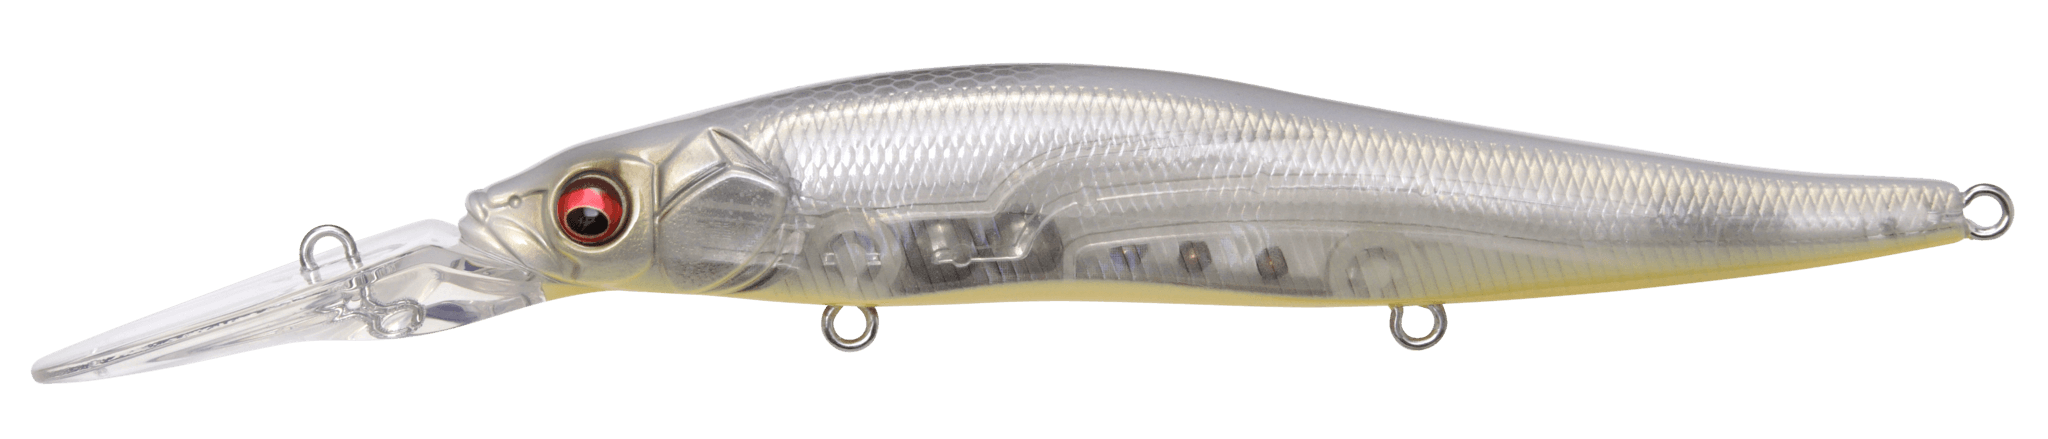 Megabass Vision 110 +2 - GP Stain Reaction OB - The Tackle Trap